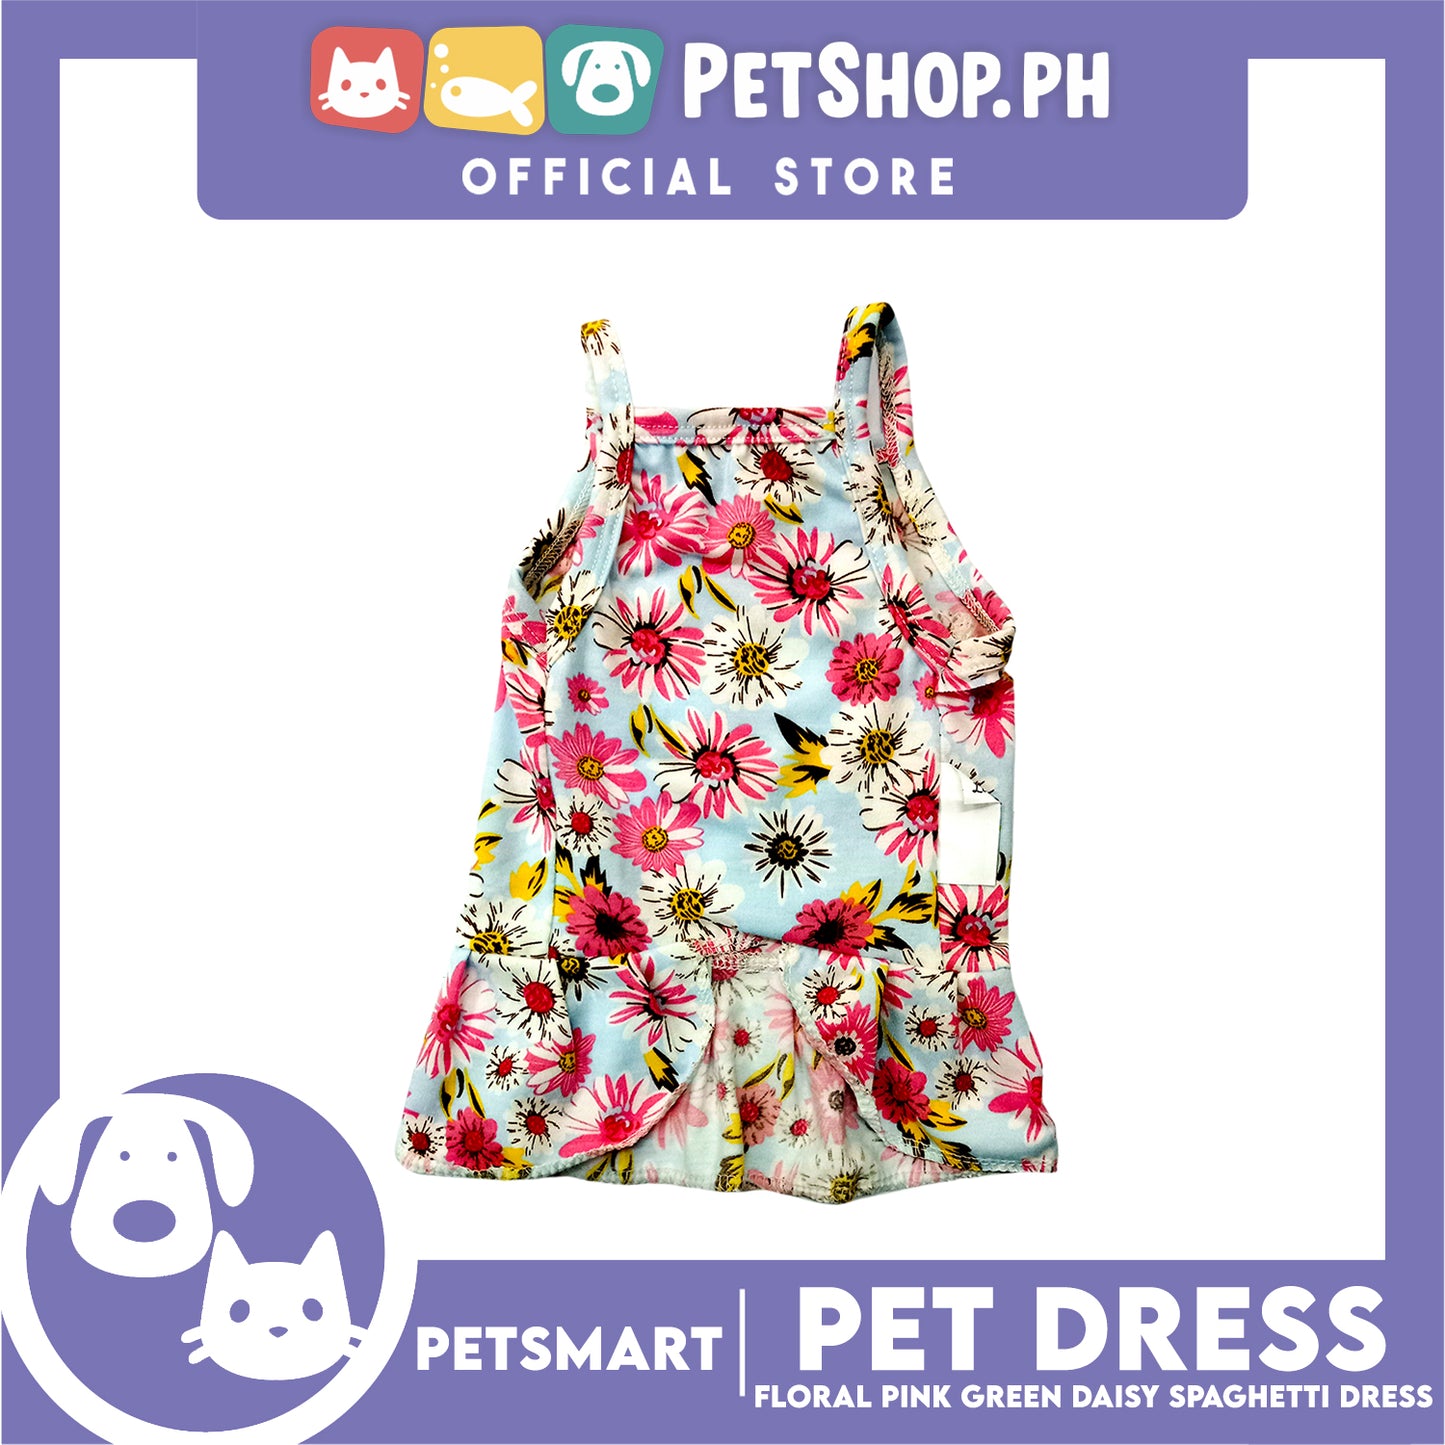 Pet Dress Floral Design, Pink Green Color Daisy Spaghetti Dress (Medium) Perfect Fit for Dogs and Cats